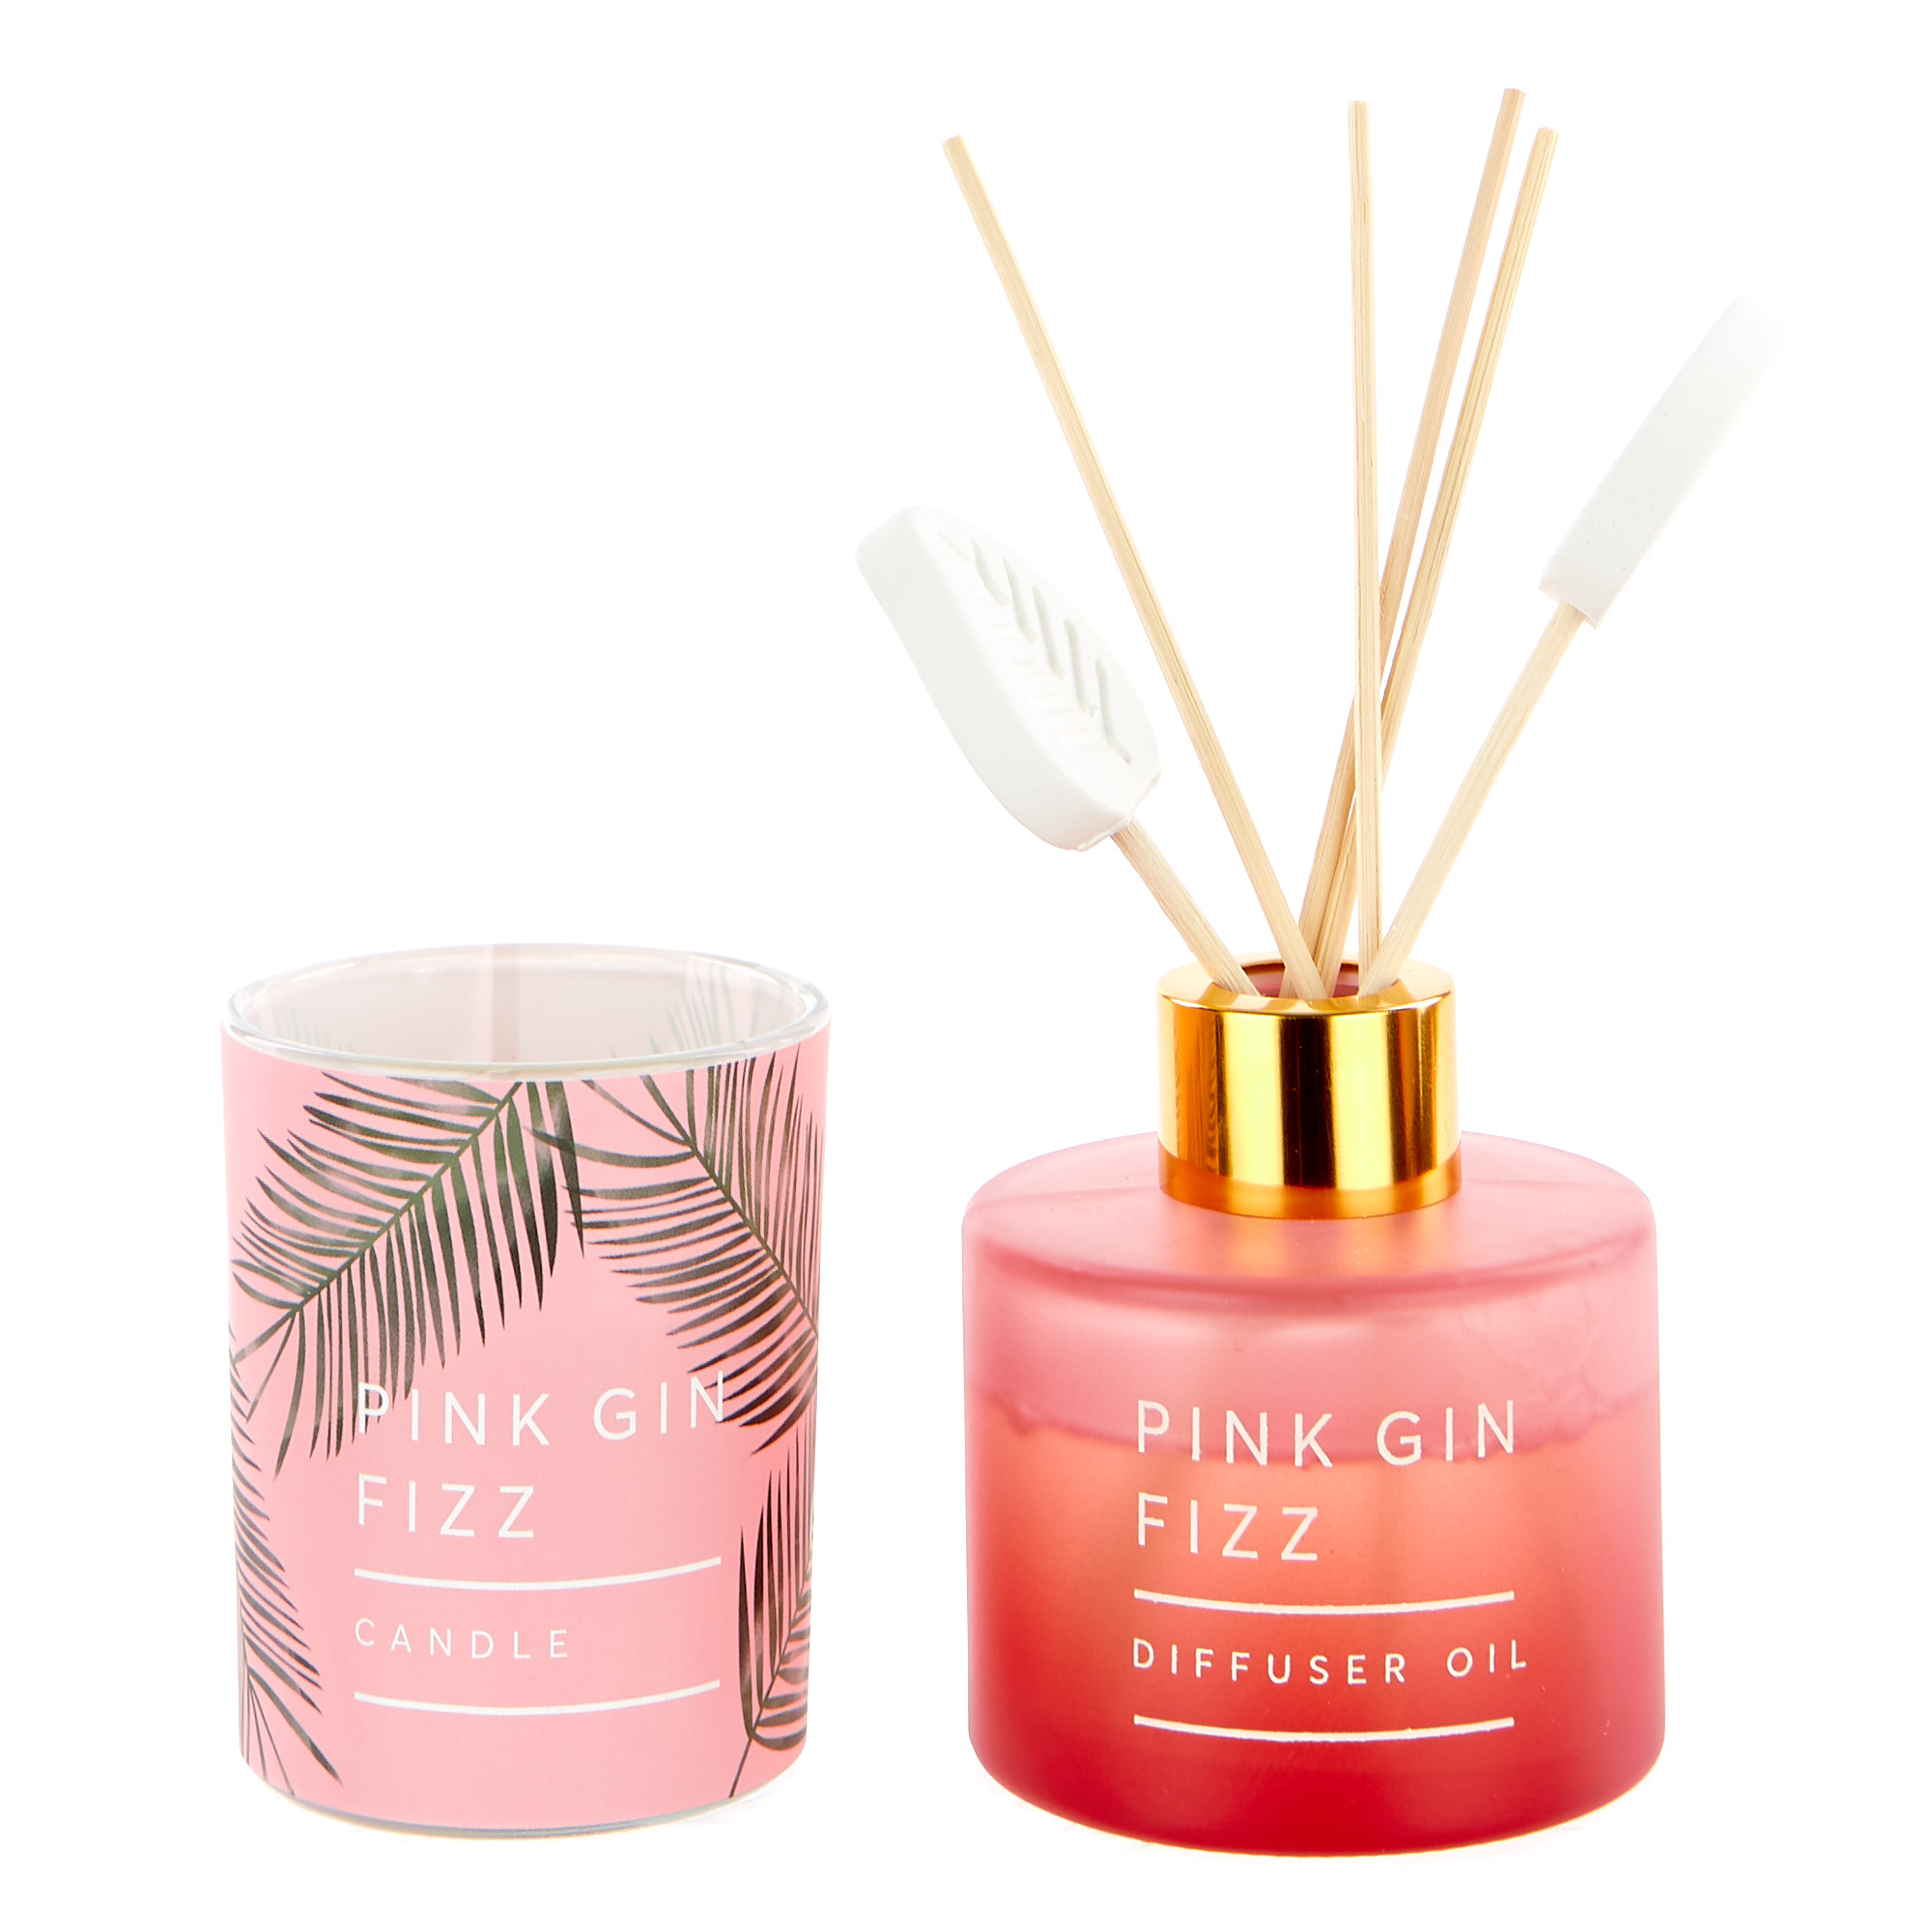 Victoria Meredith Pink Gin Fizz Candle & Diffuser Gift Set